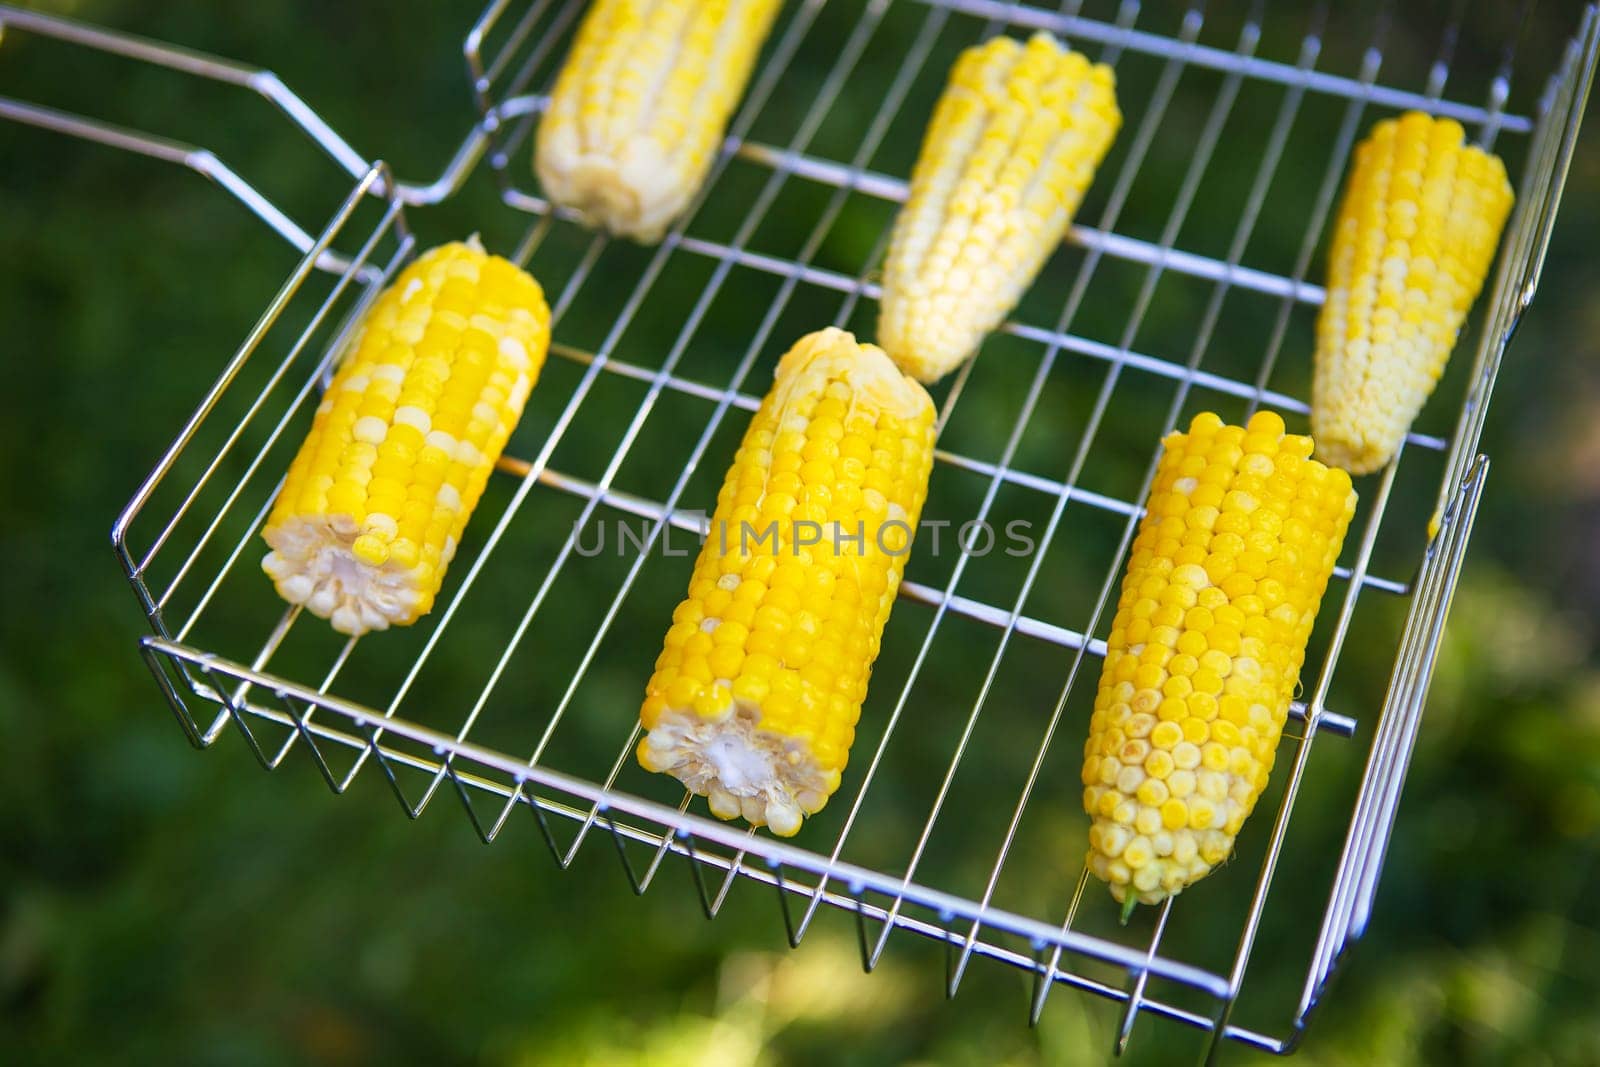 Delicious sweet corn is grilled on the grill. Outdoor recreation